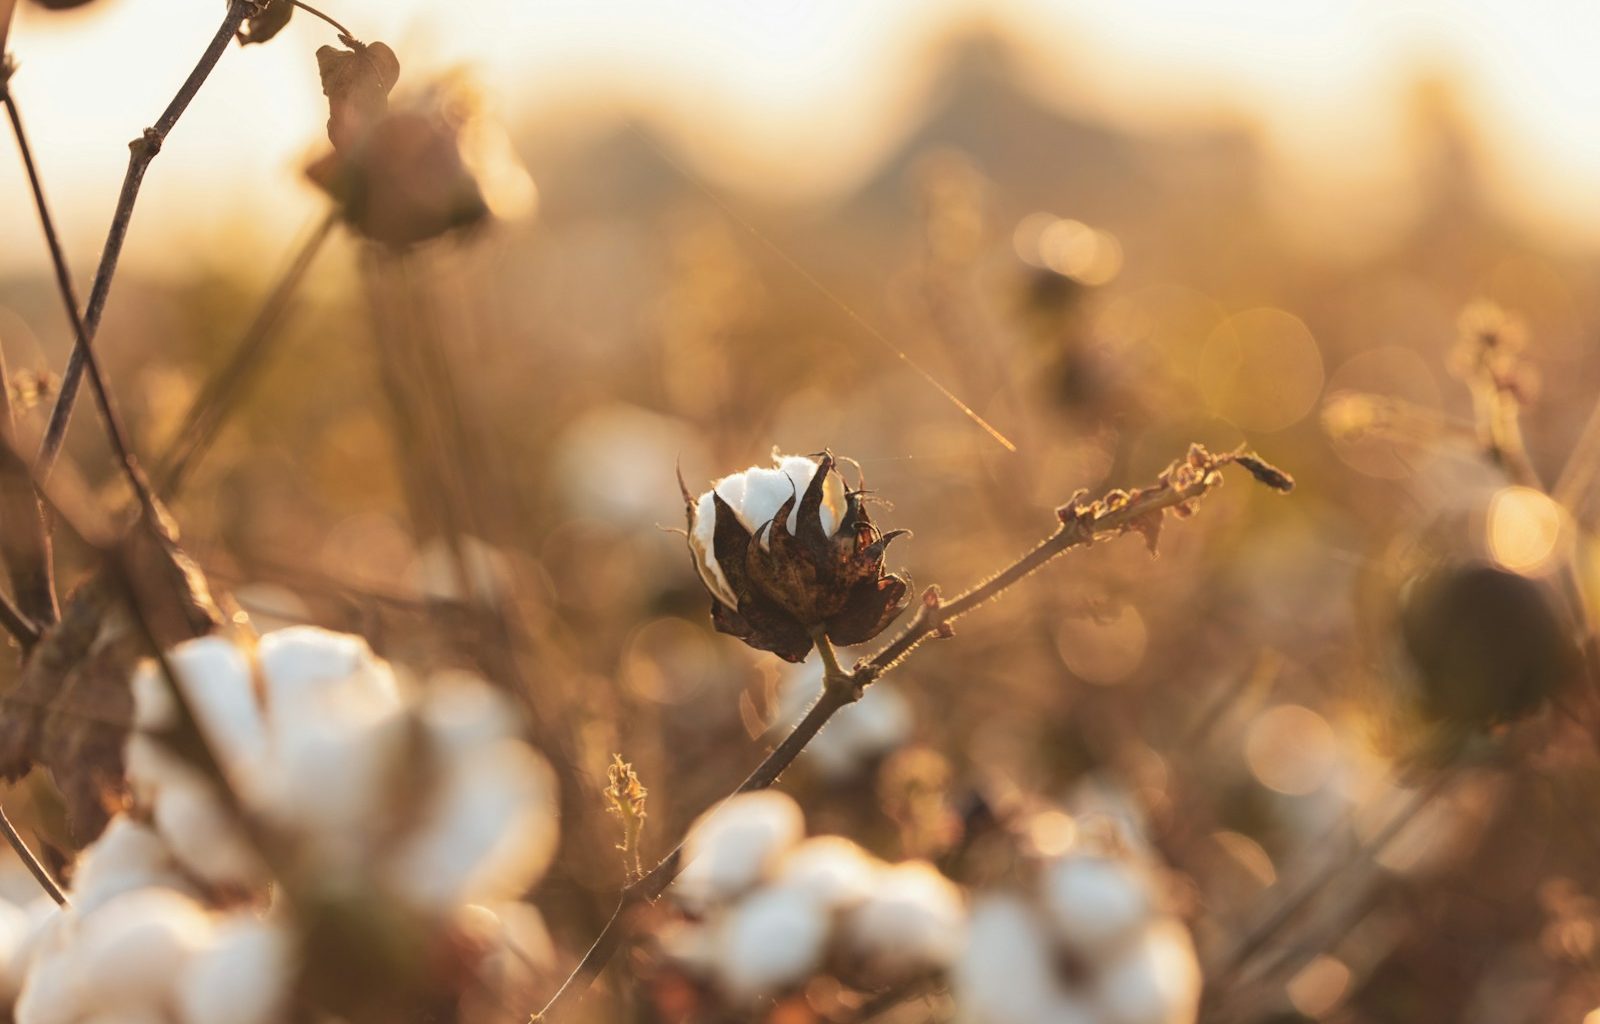 a close up of a cotton plant with a blurry background